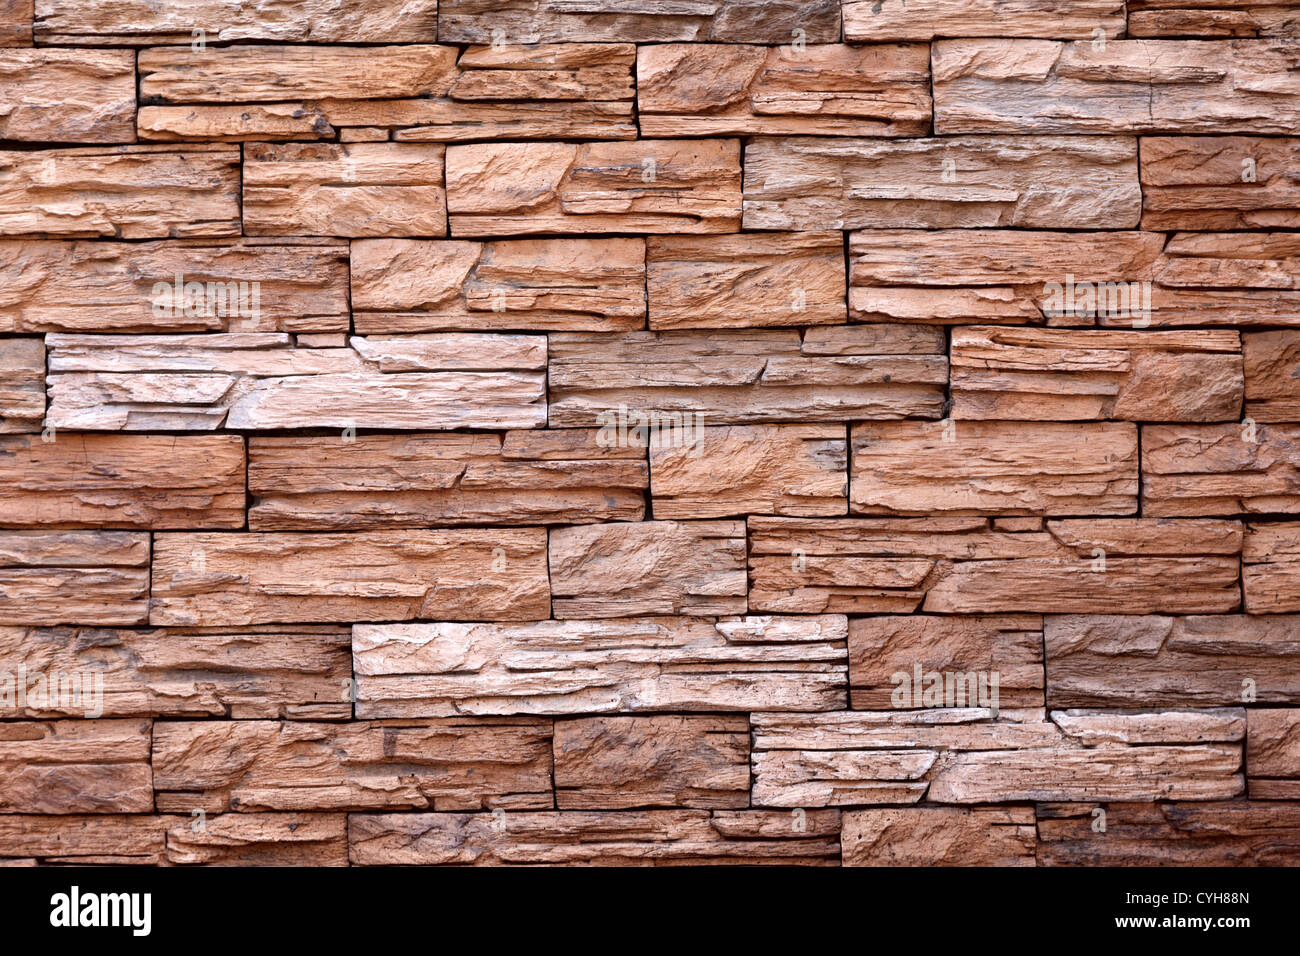 The texture of the red stone wall Stock Photo